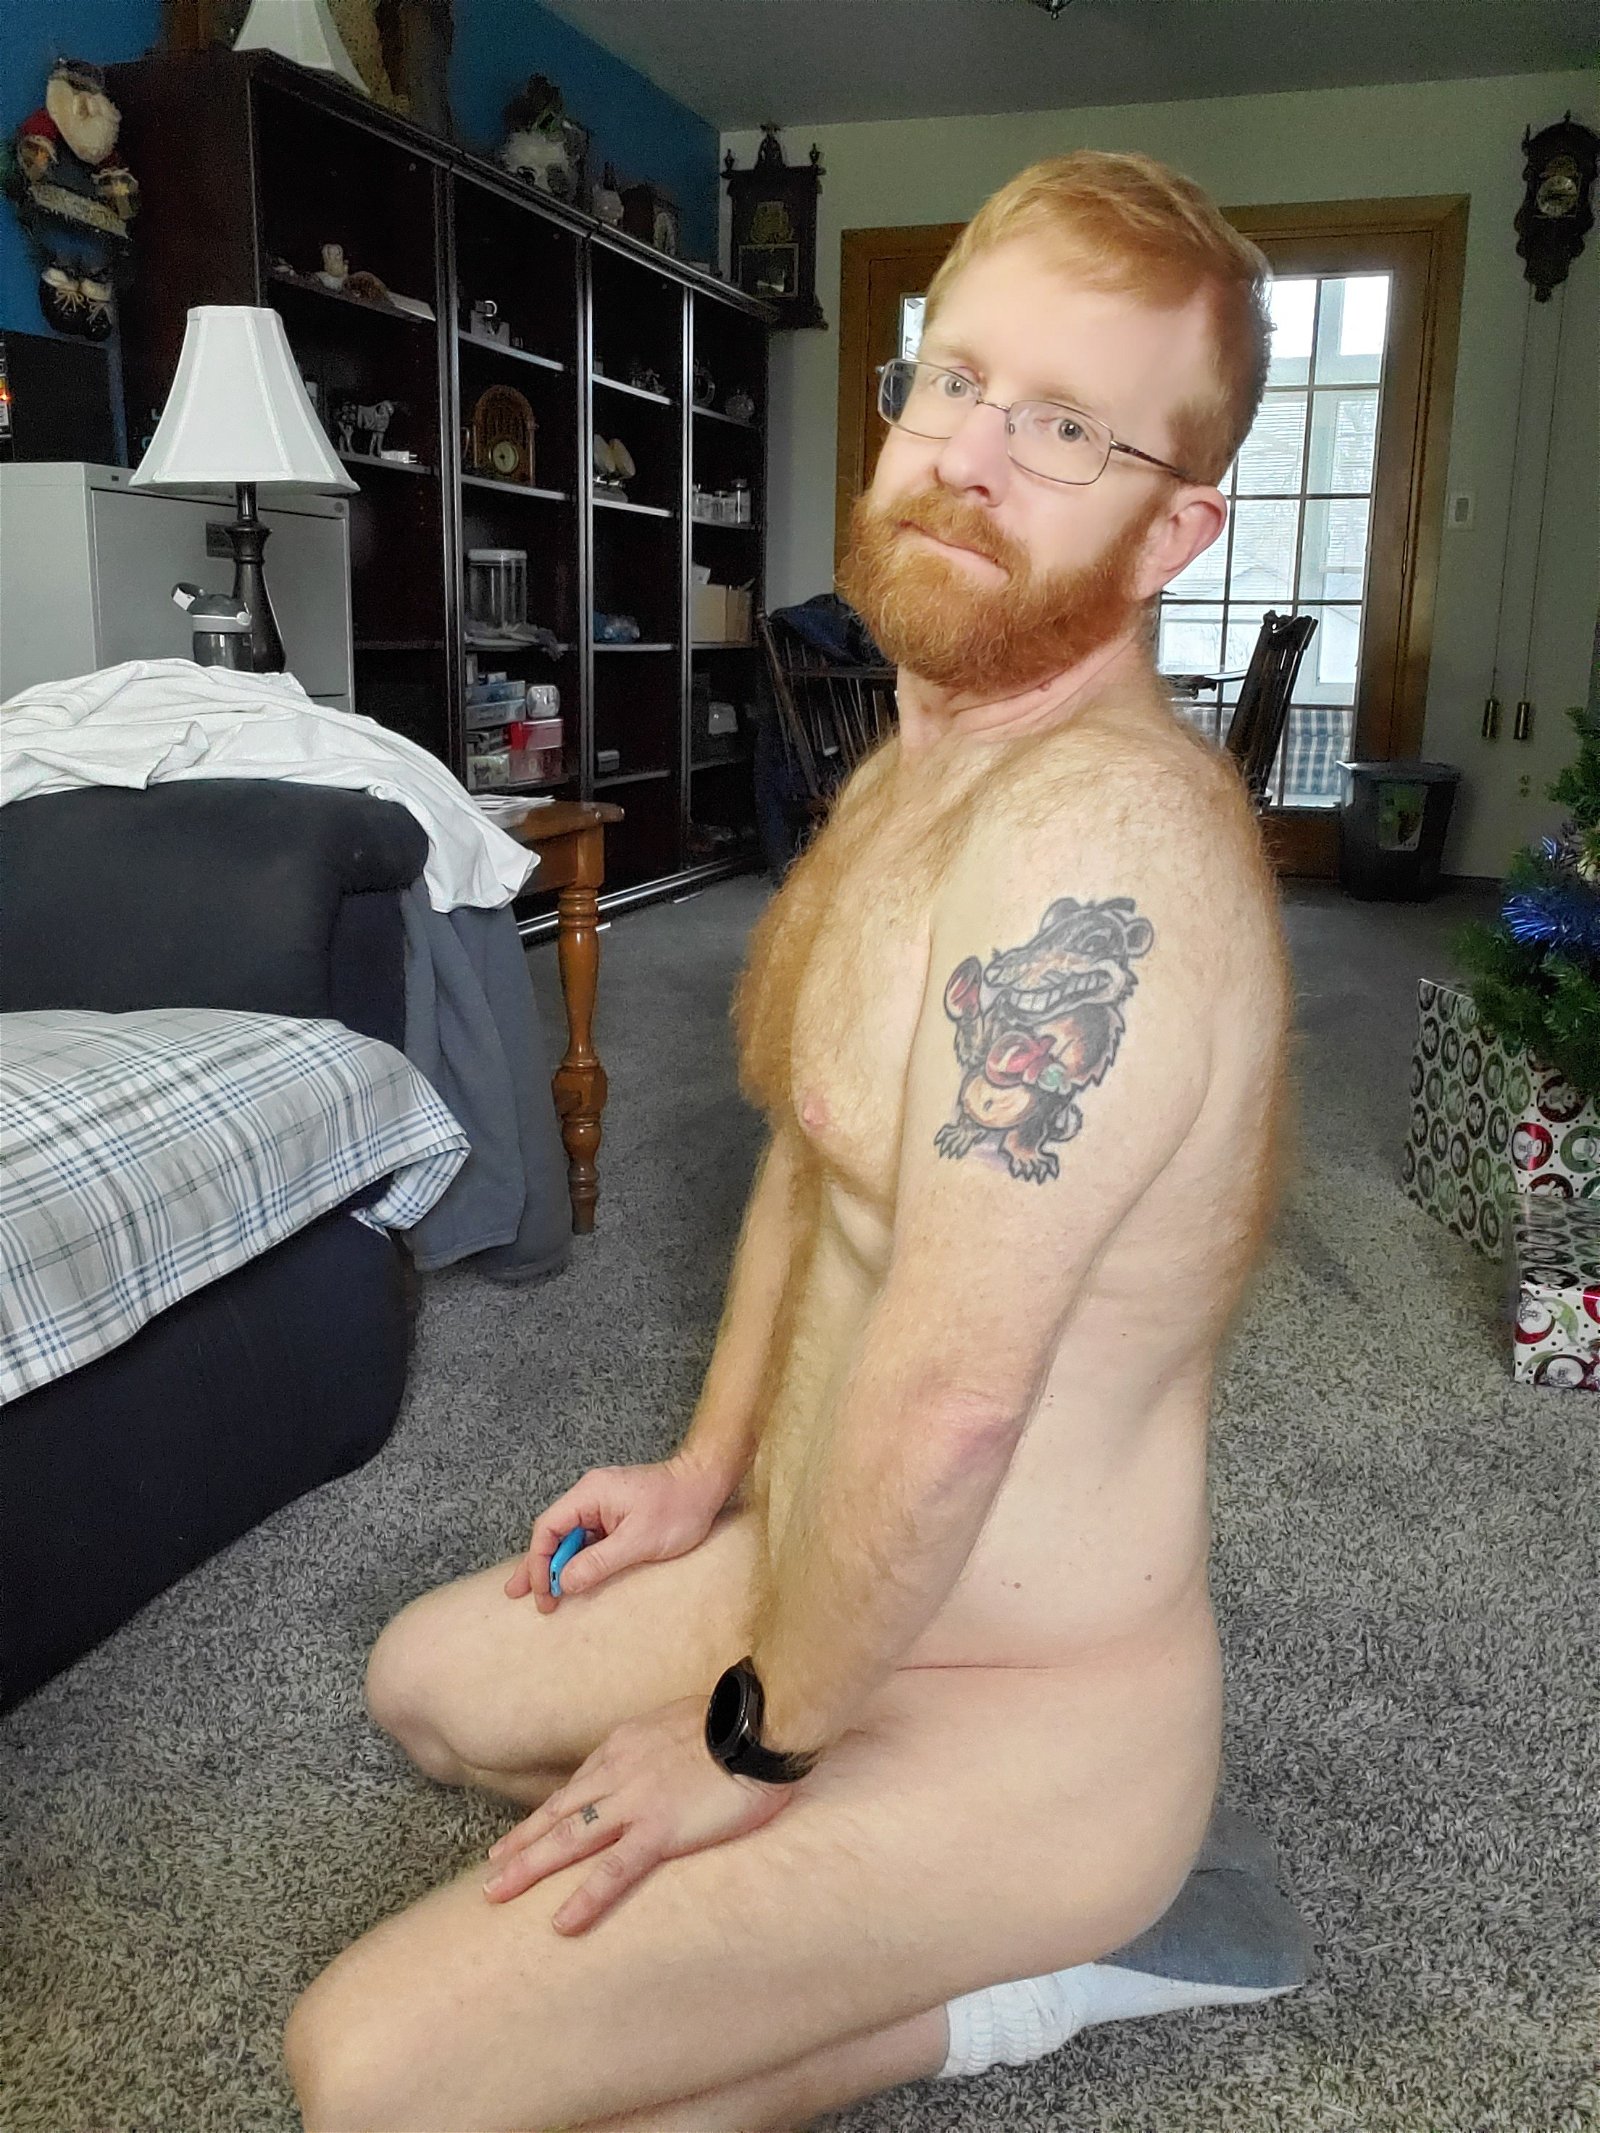 Photo by OtterInRed with the username @OtterInRed, who is a verified user,  December 15, 2019 at 2:54 AM and the text says '#cubbyinred #otterinred #cubby #gingerbutt #gingerass #firebottom #fuckme #gingerdick #gingercock #firecrotch #harddick #hardcock #bigballs #smallcock #smalldick #smallandproud'